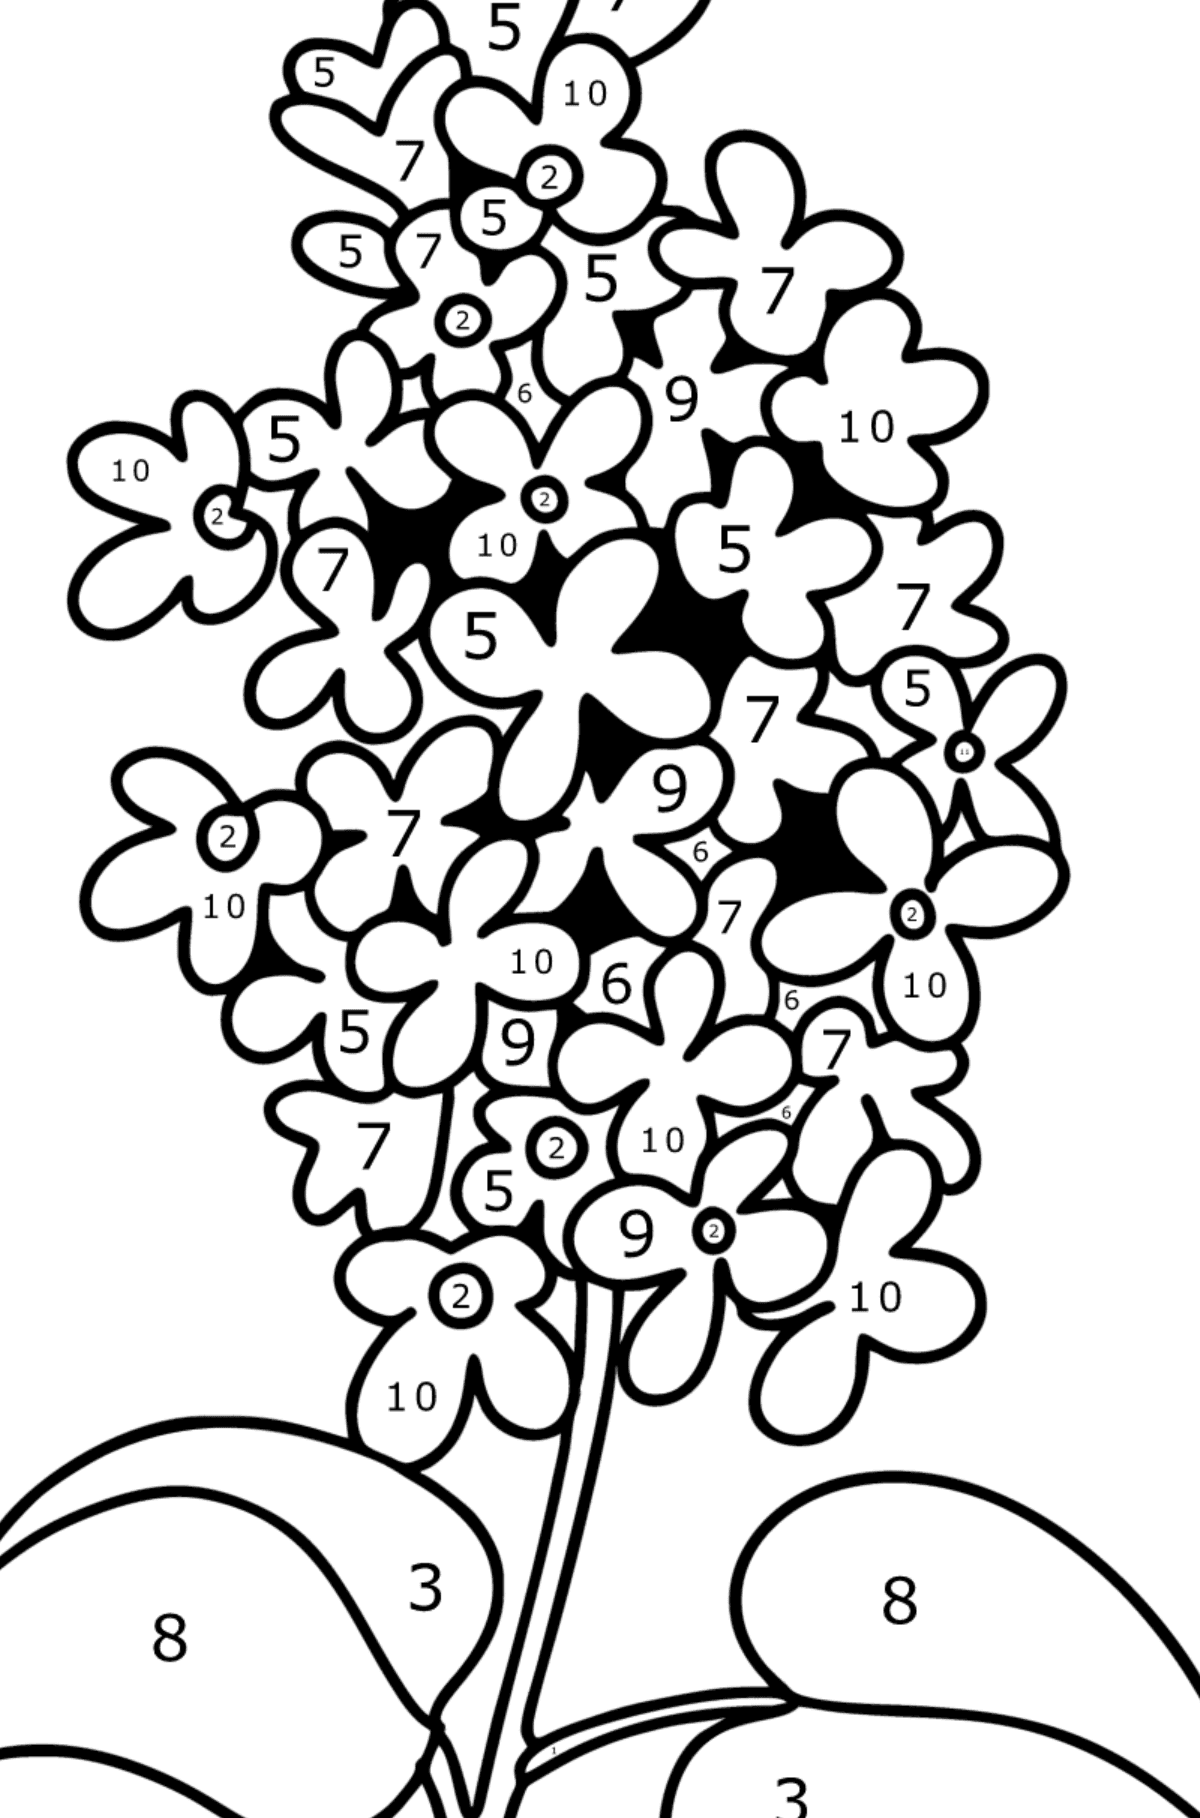 Lilac sprig coloring page - Coloring by Numbers for Kids